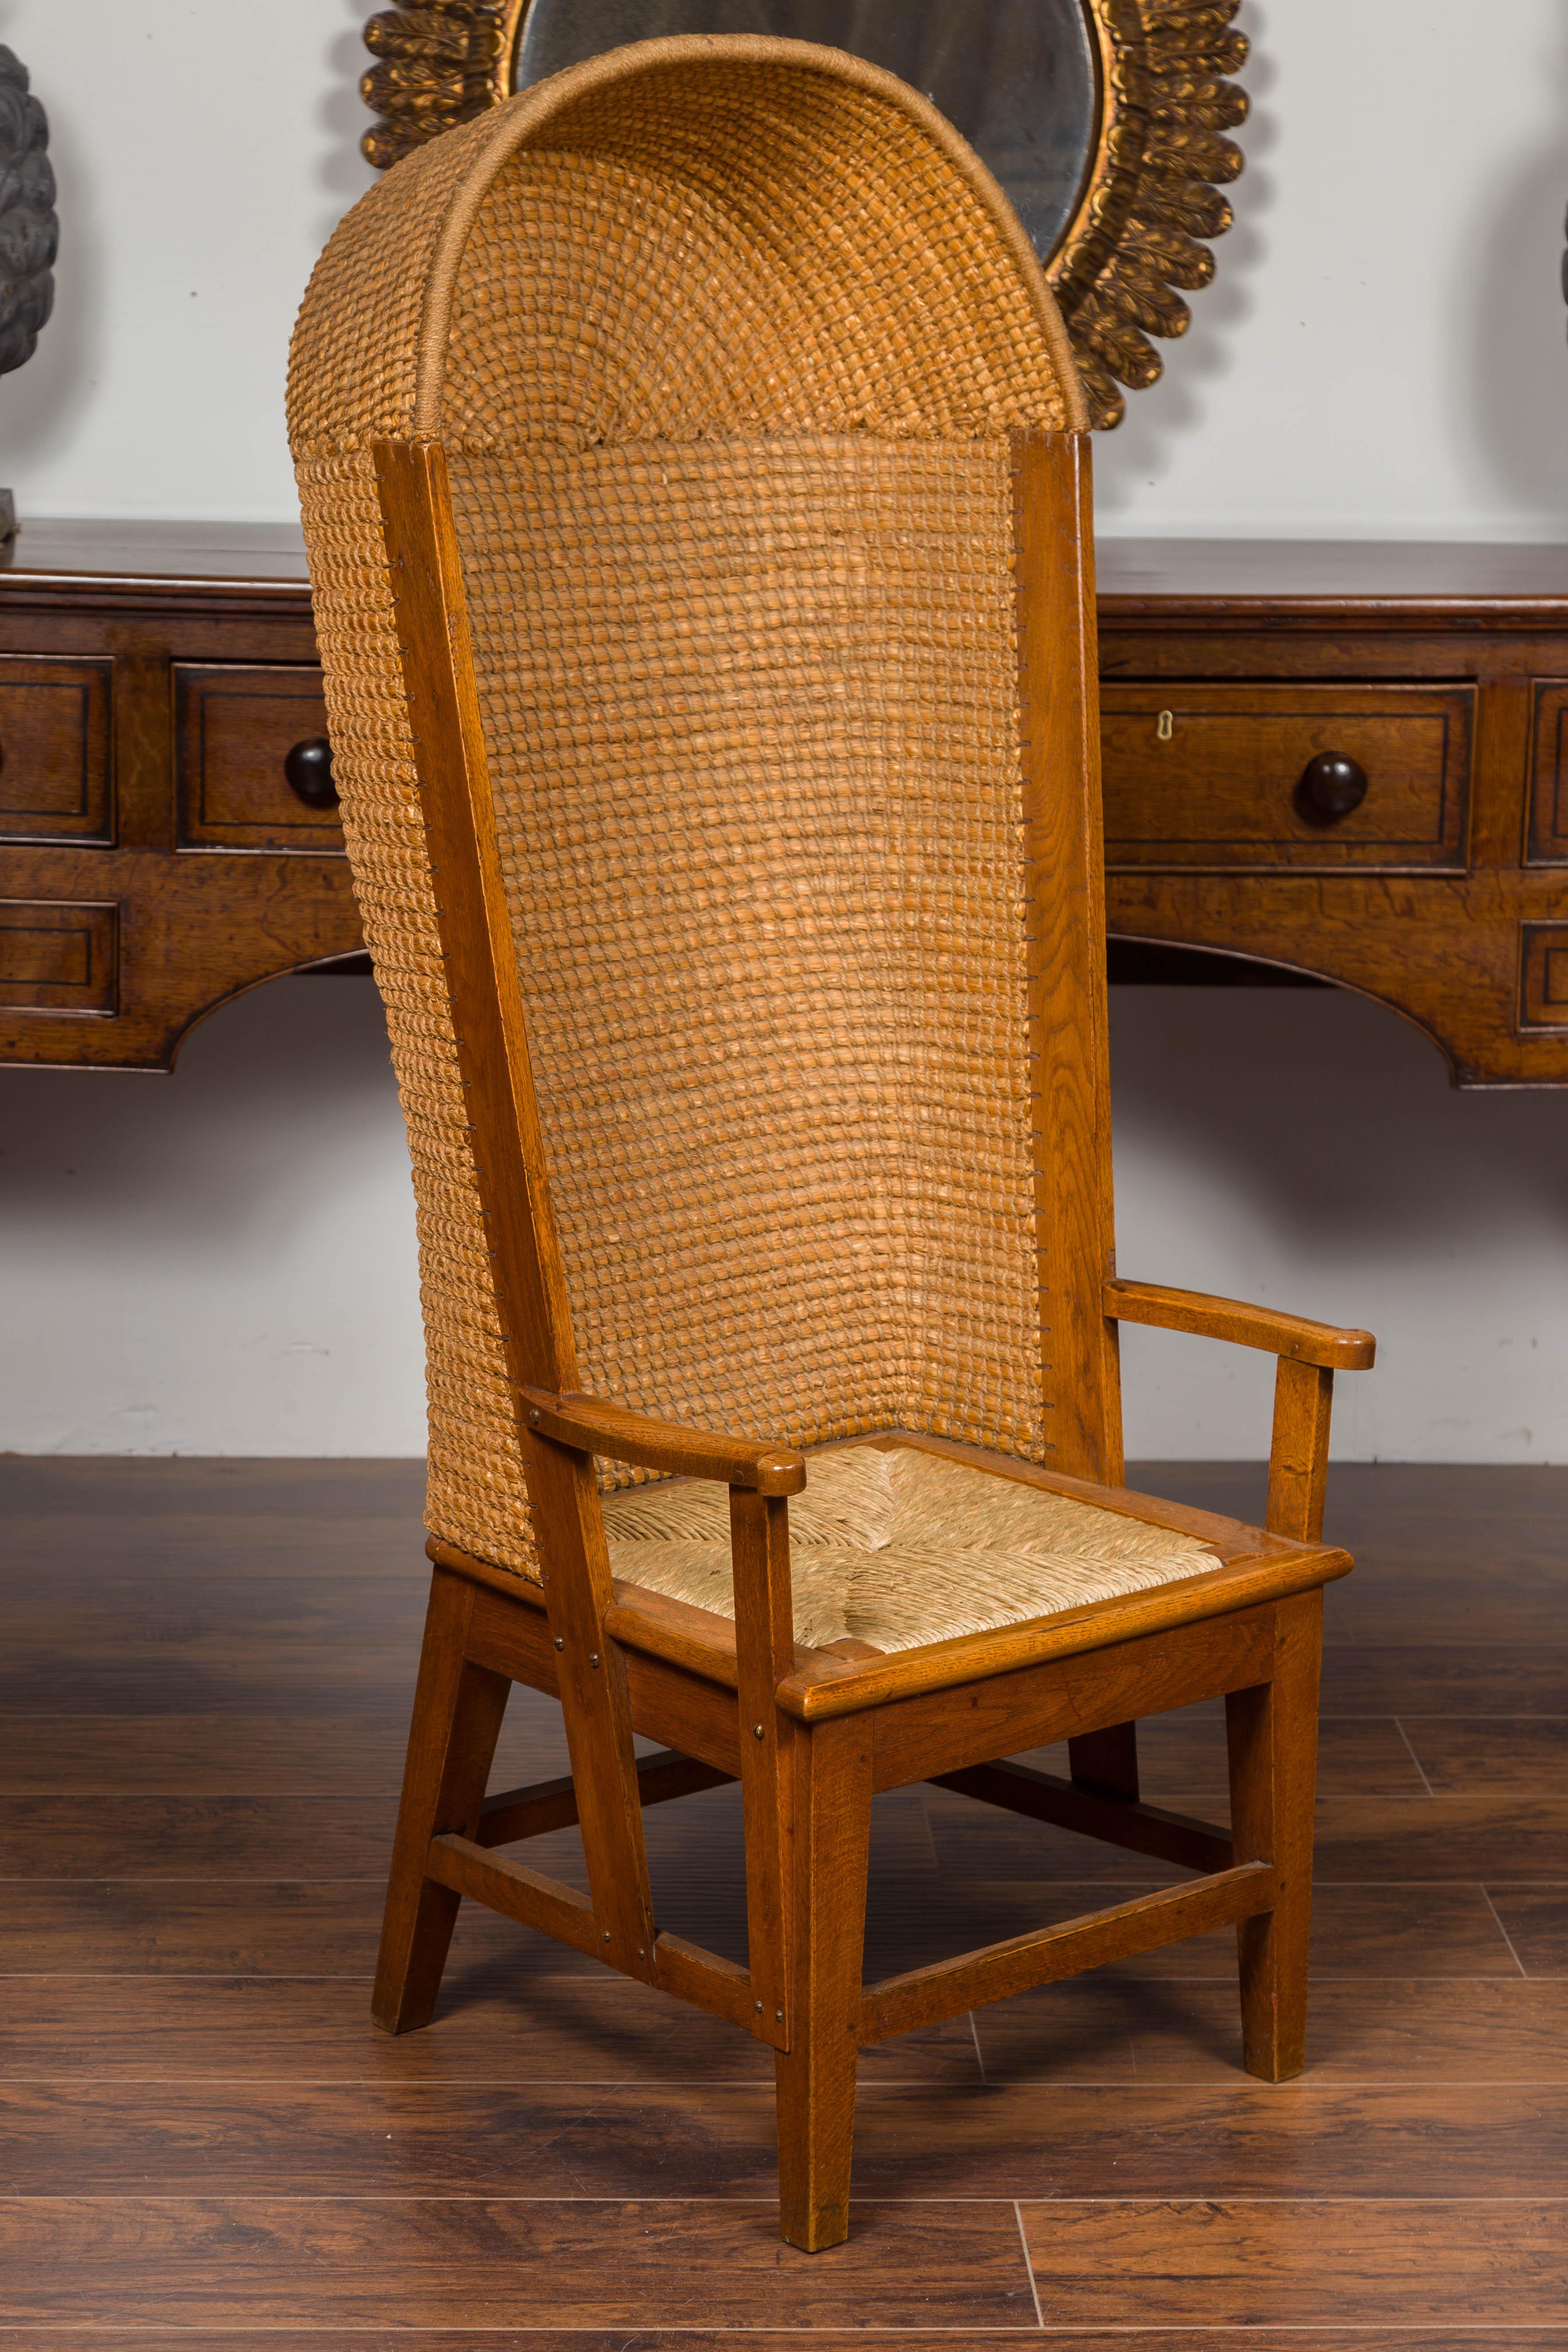 A Scottish Orkney Island canopy chair from the early 20th century with handwoven straw hooded back, rush seat, open arms, tapering legs and side stretchers. Born during the turn of the century in the archipelago of Orkney off of the northern coast